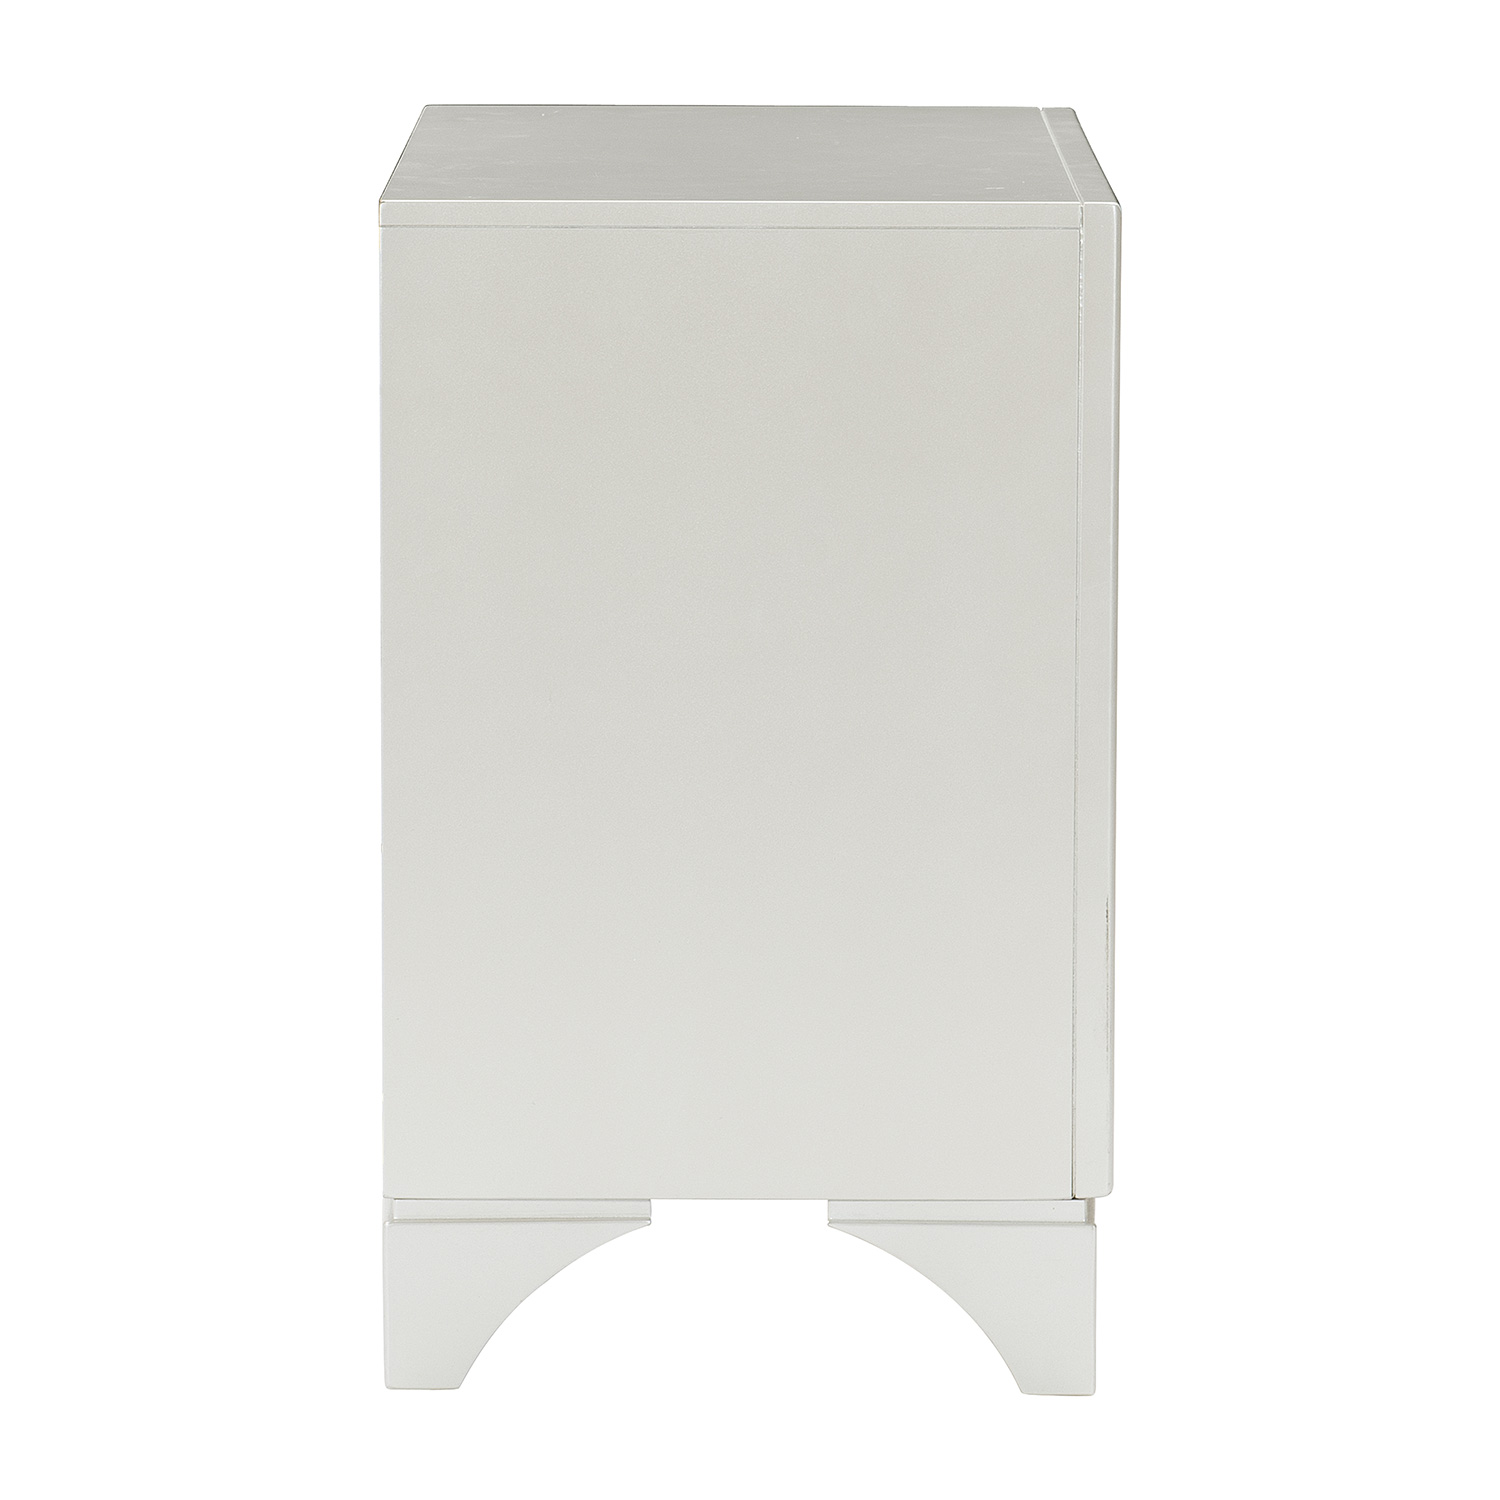 Homelegance Salon Night Stand - White Pearlescent